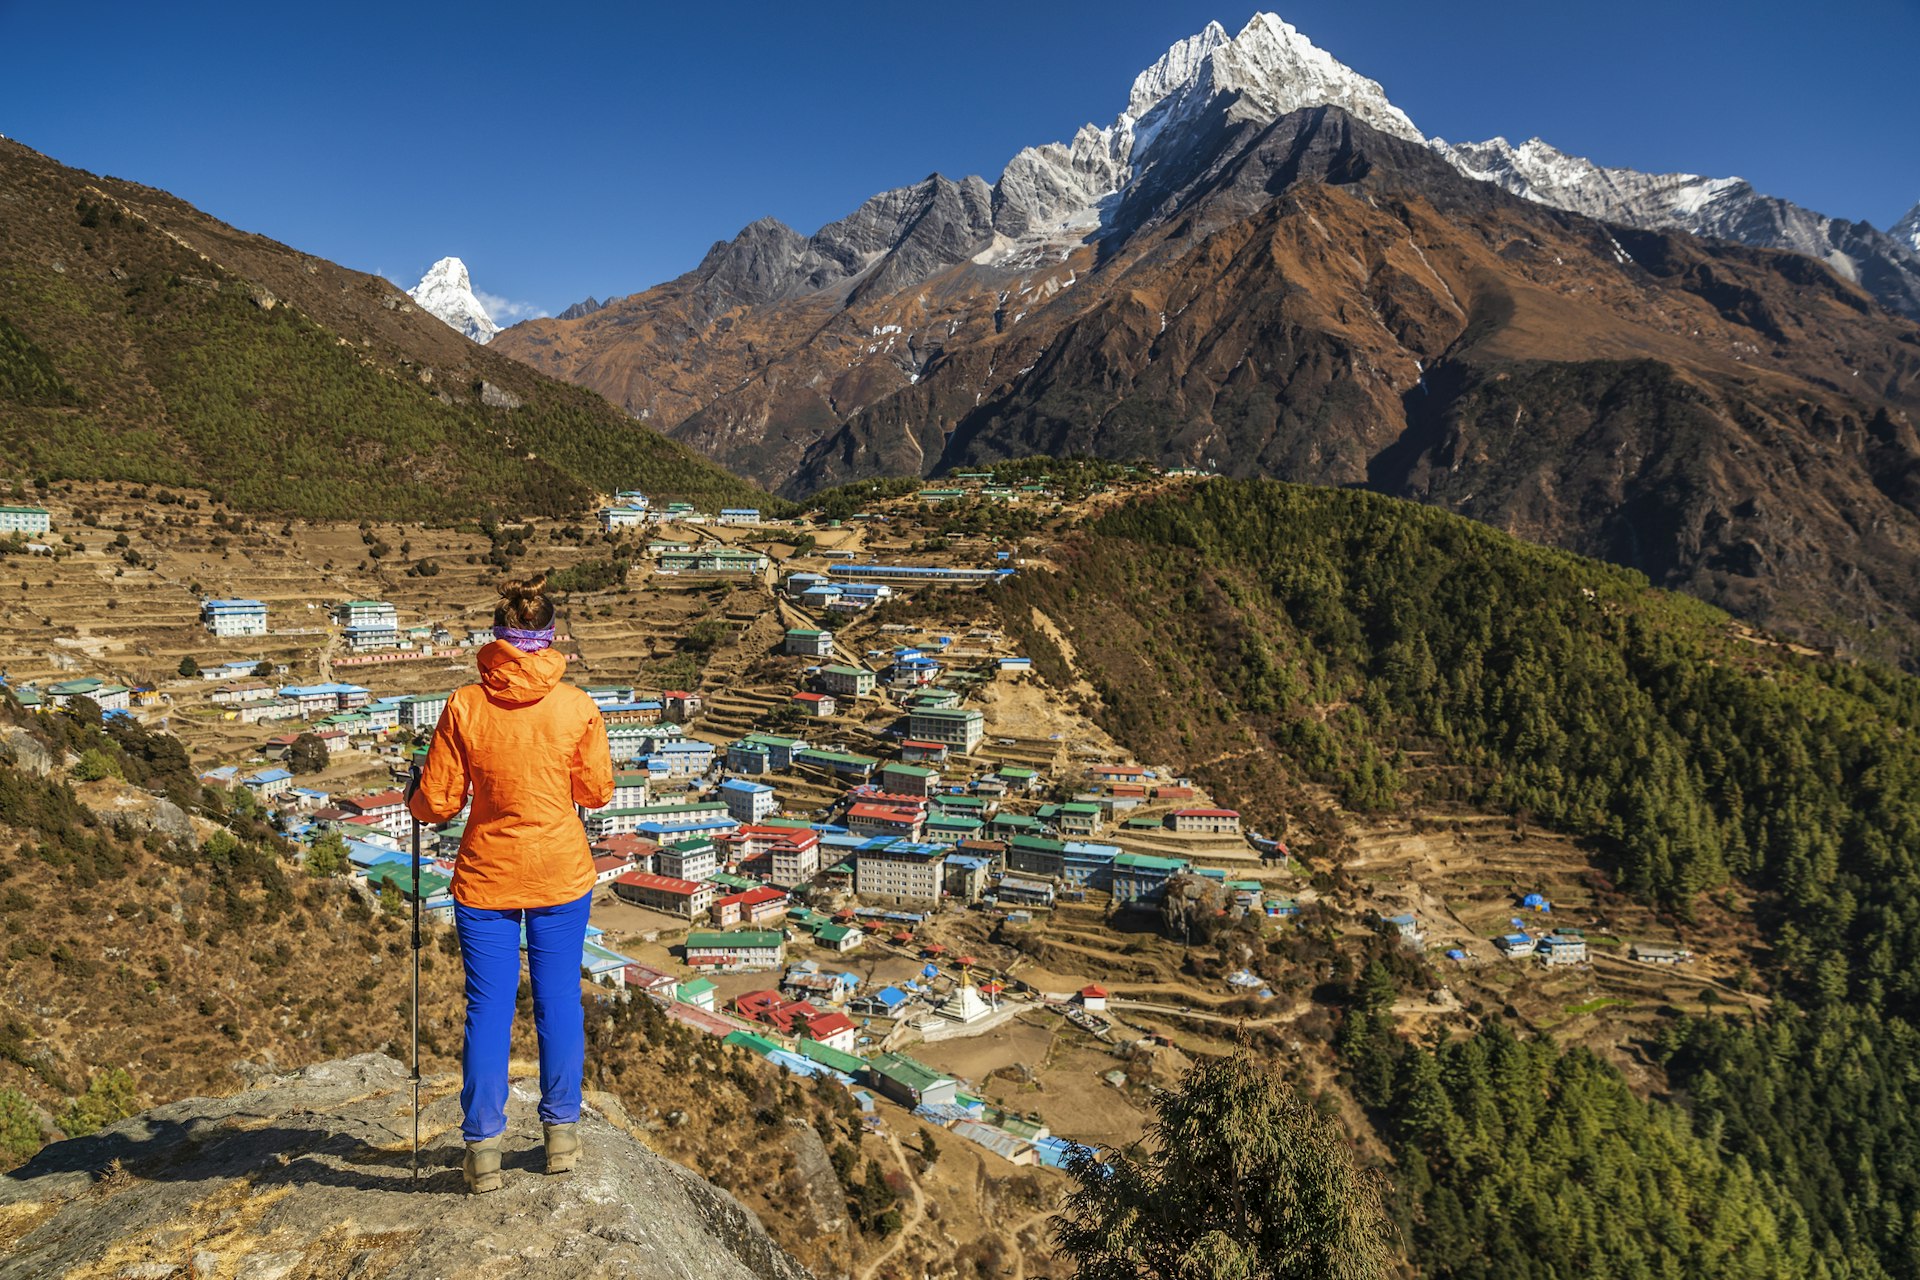 A female trekker stands on a high point looking down towards a mountain settlement